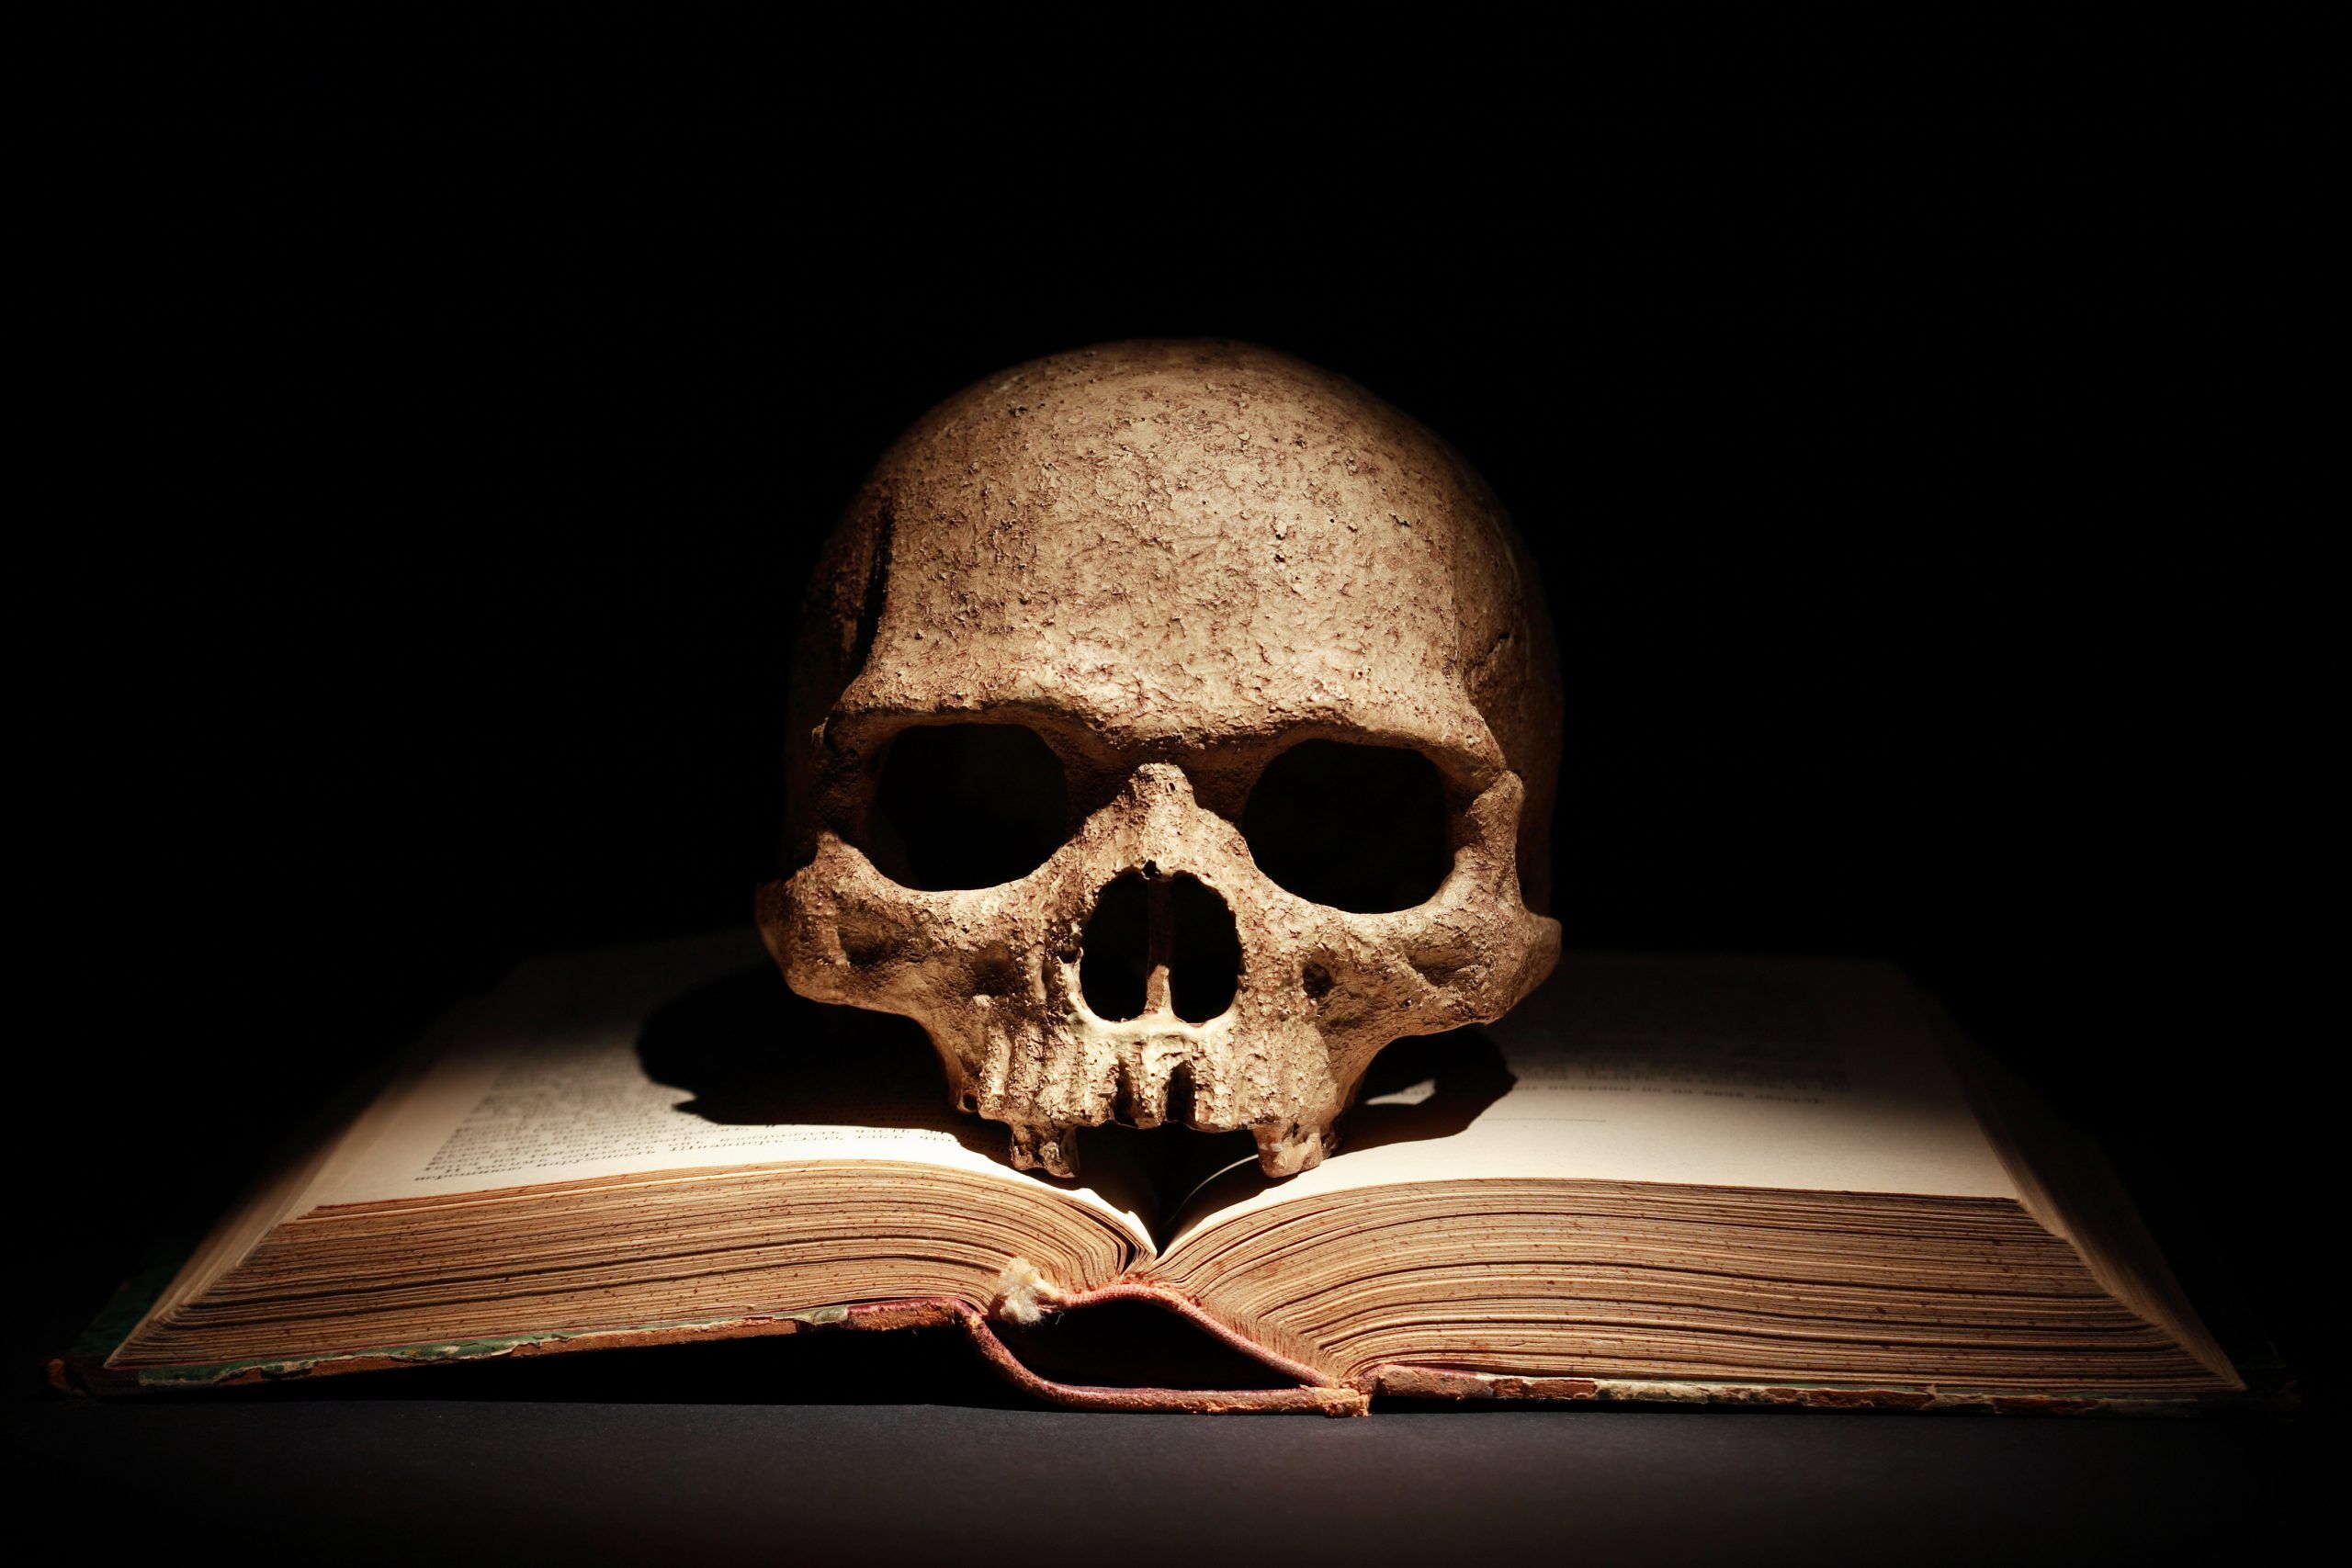 horror book with skull